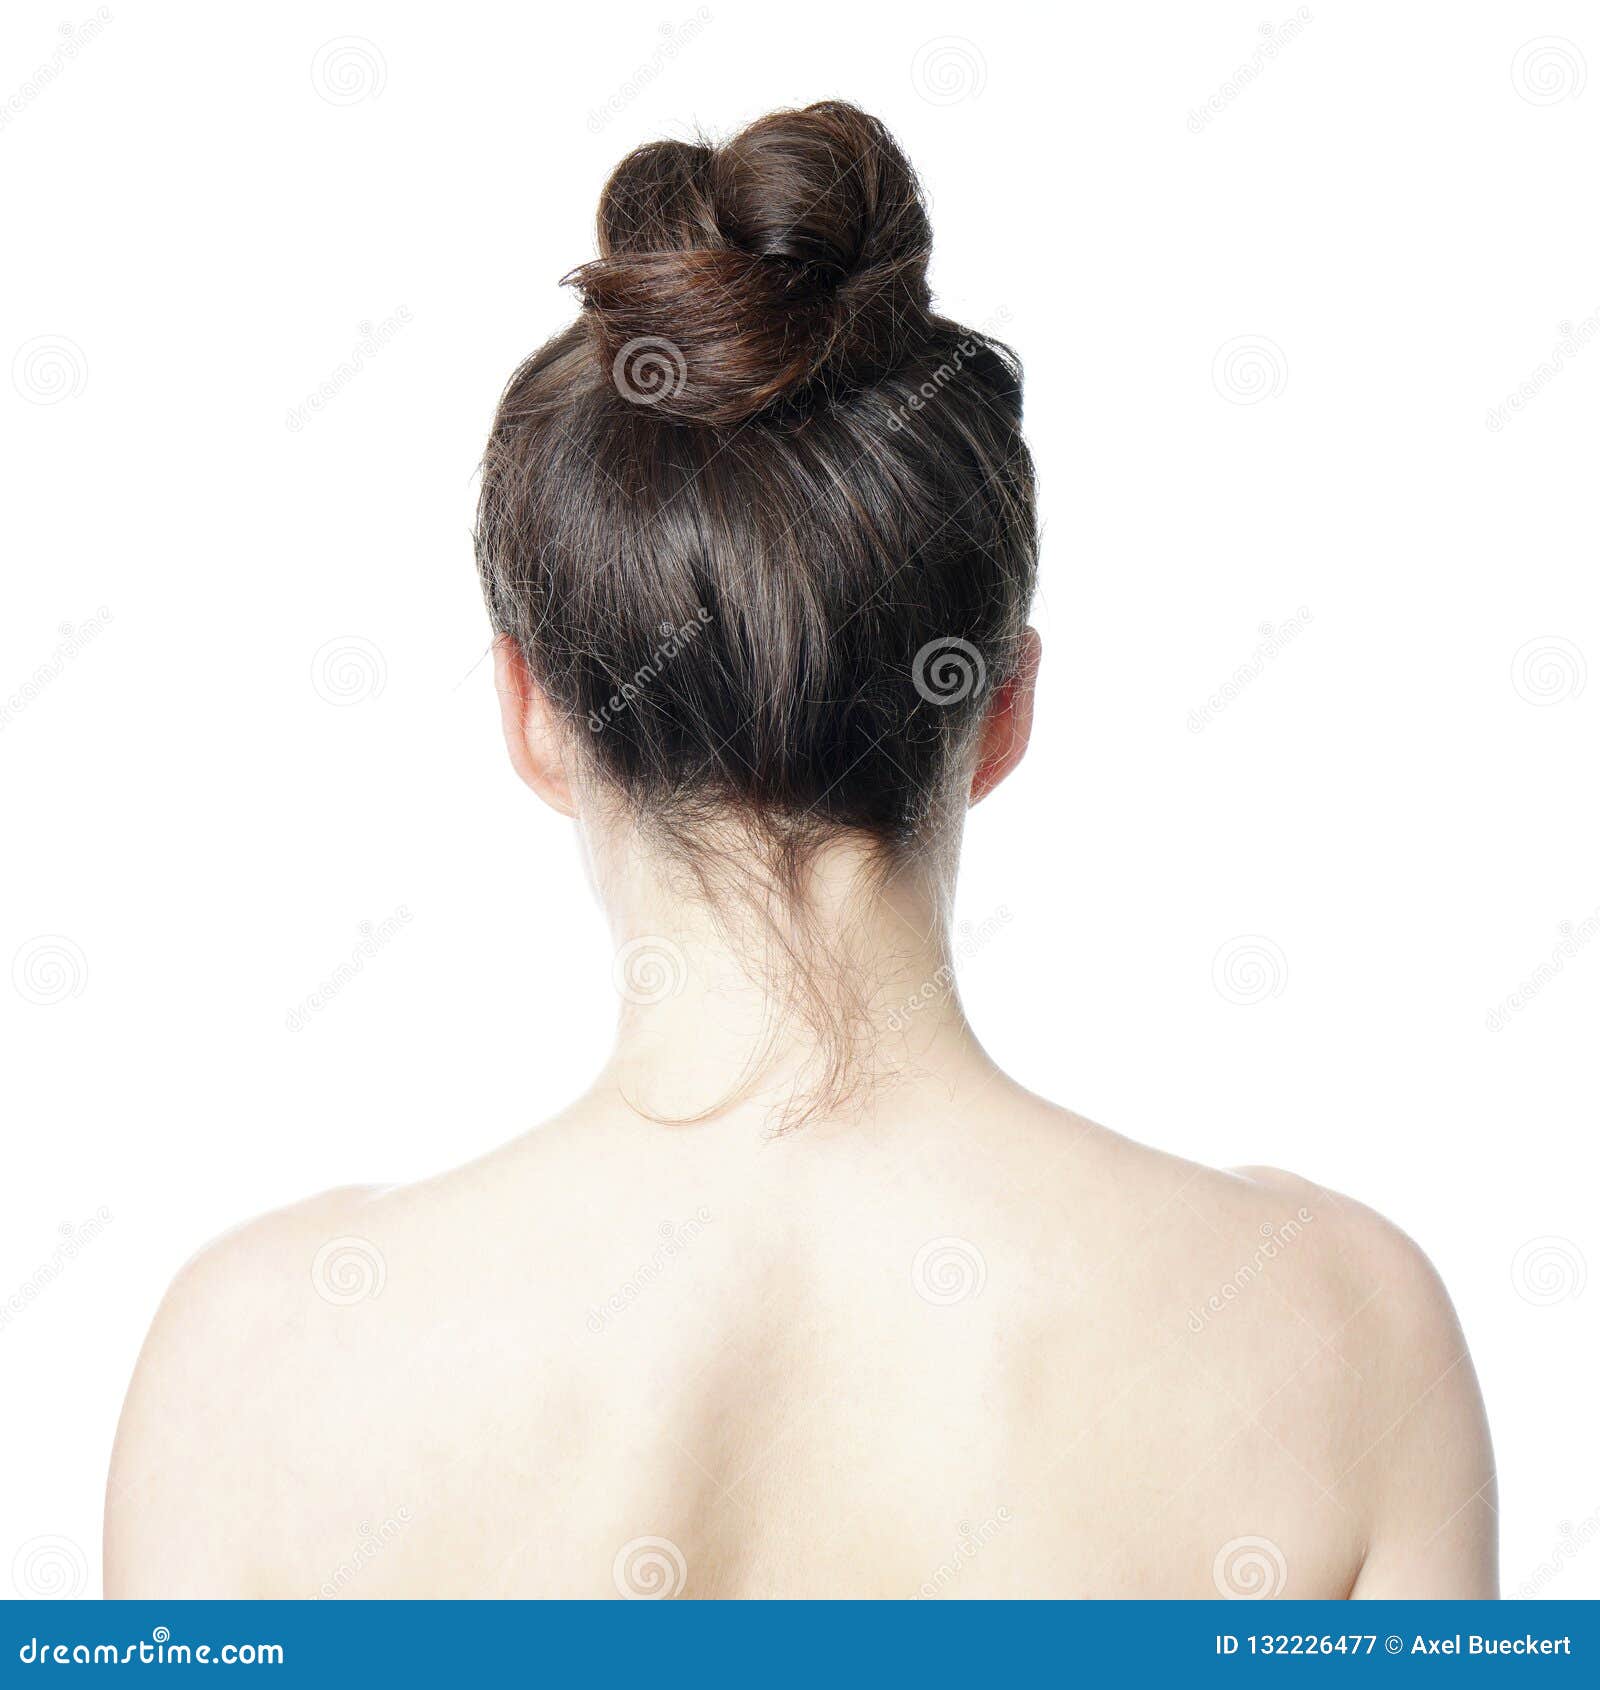 Rear View of Woman with Messy Bun Hair Style Stock Image - Image of lady,  shoulders: 132226477